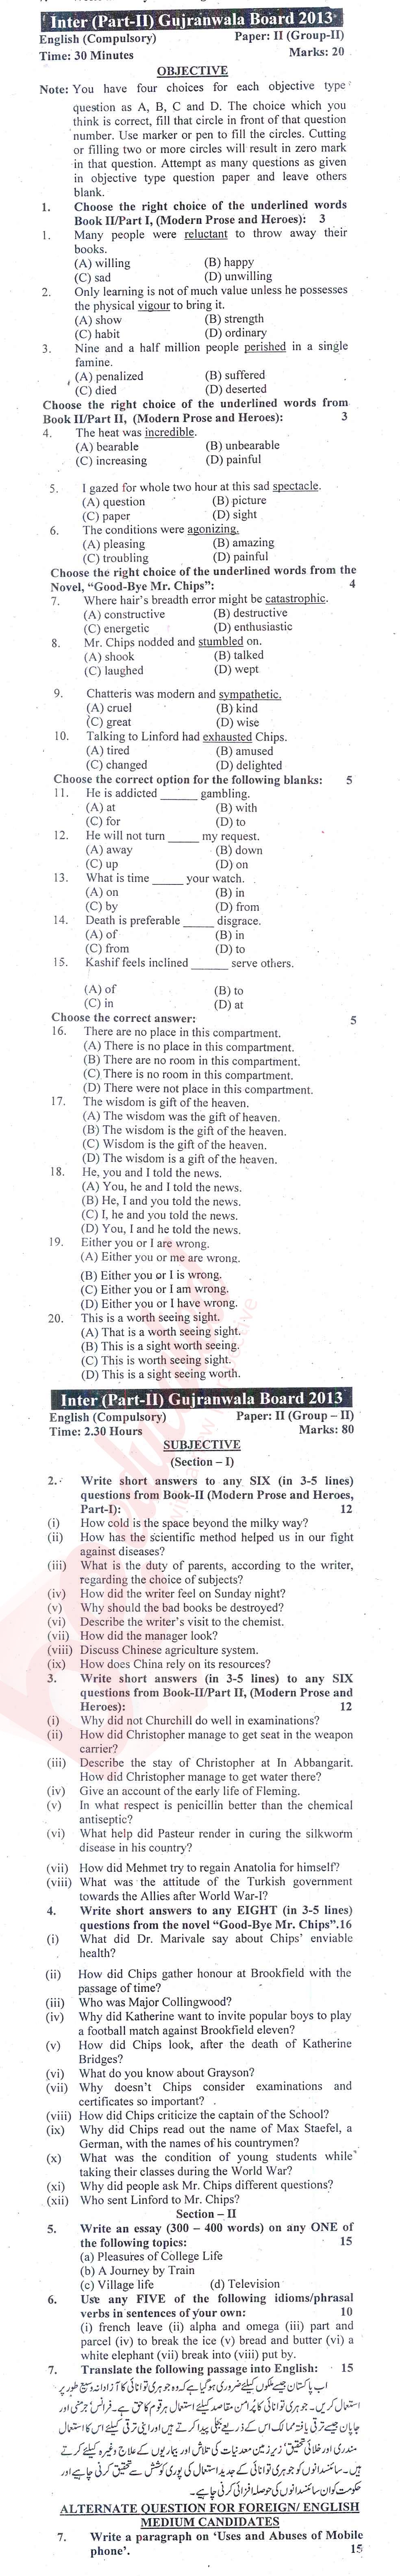 English 12th class Past Paper Group 2 BISE Gujranwala 2013